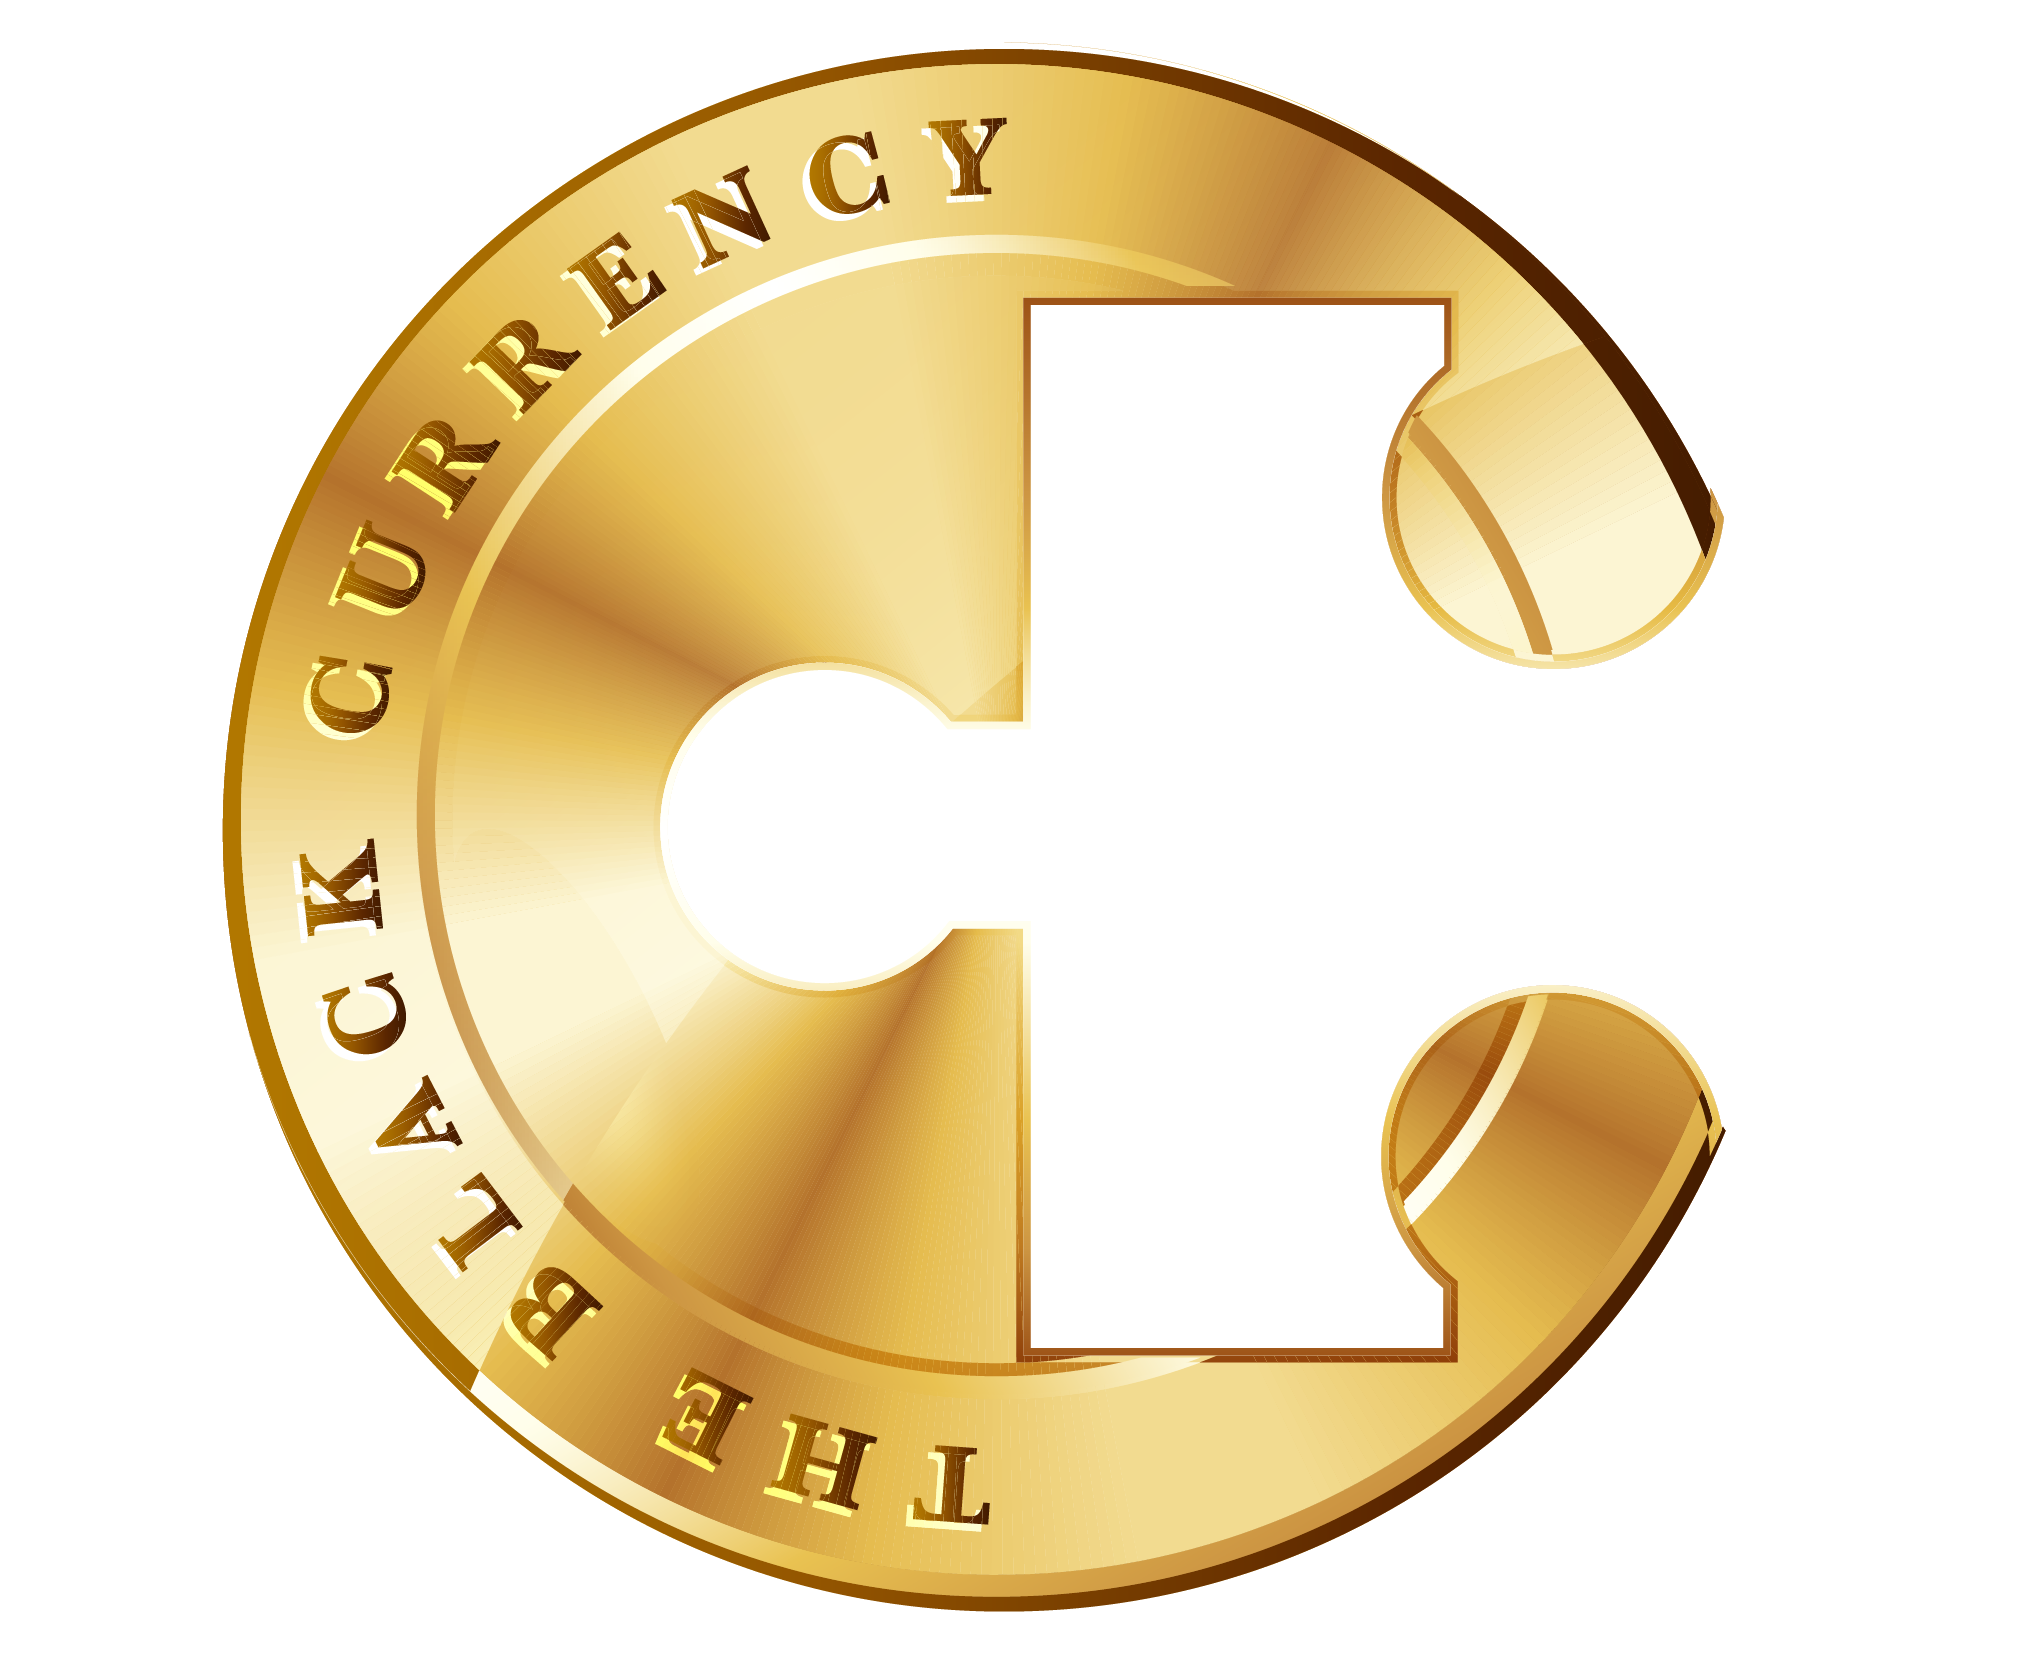 The Black Currency logo